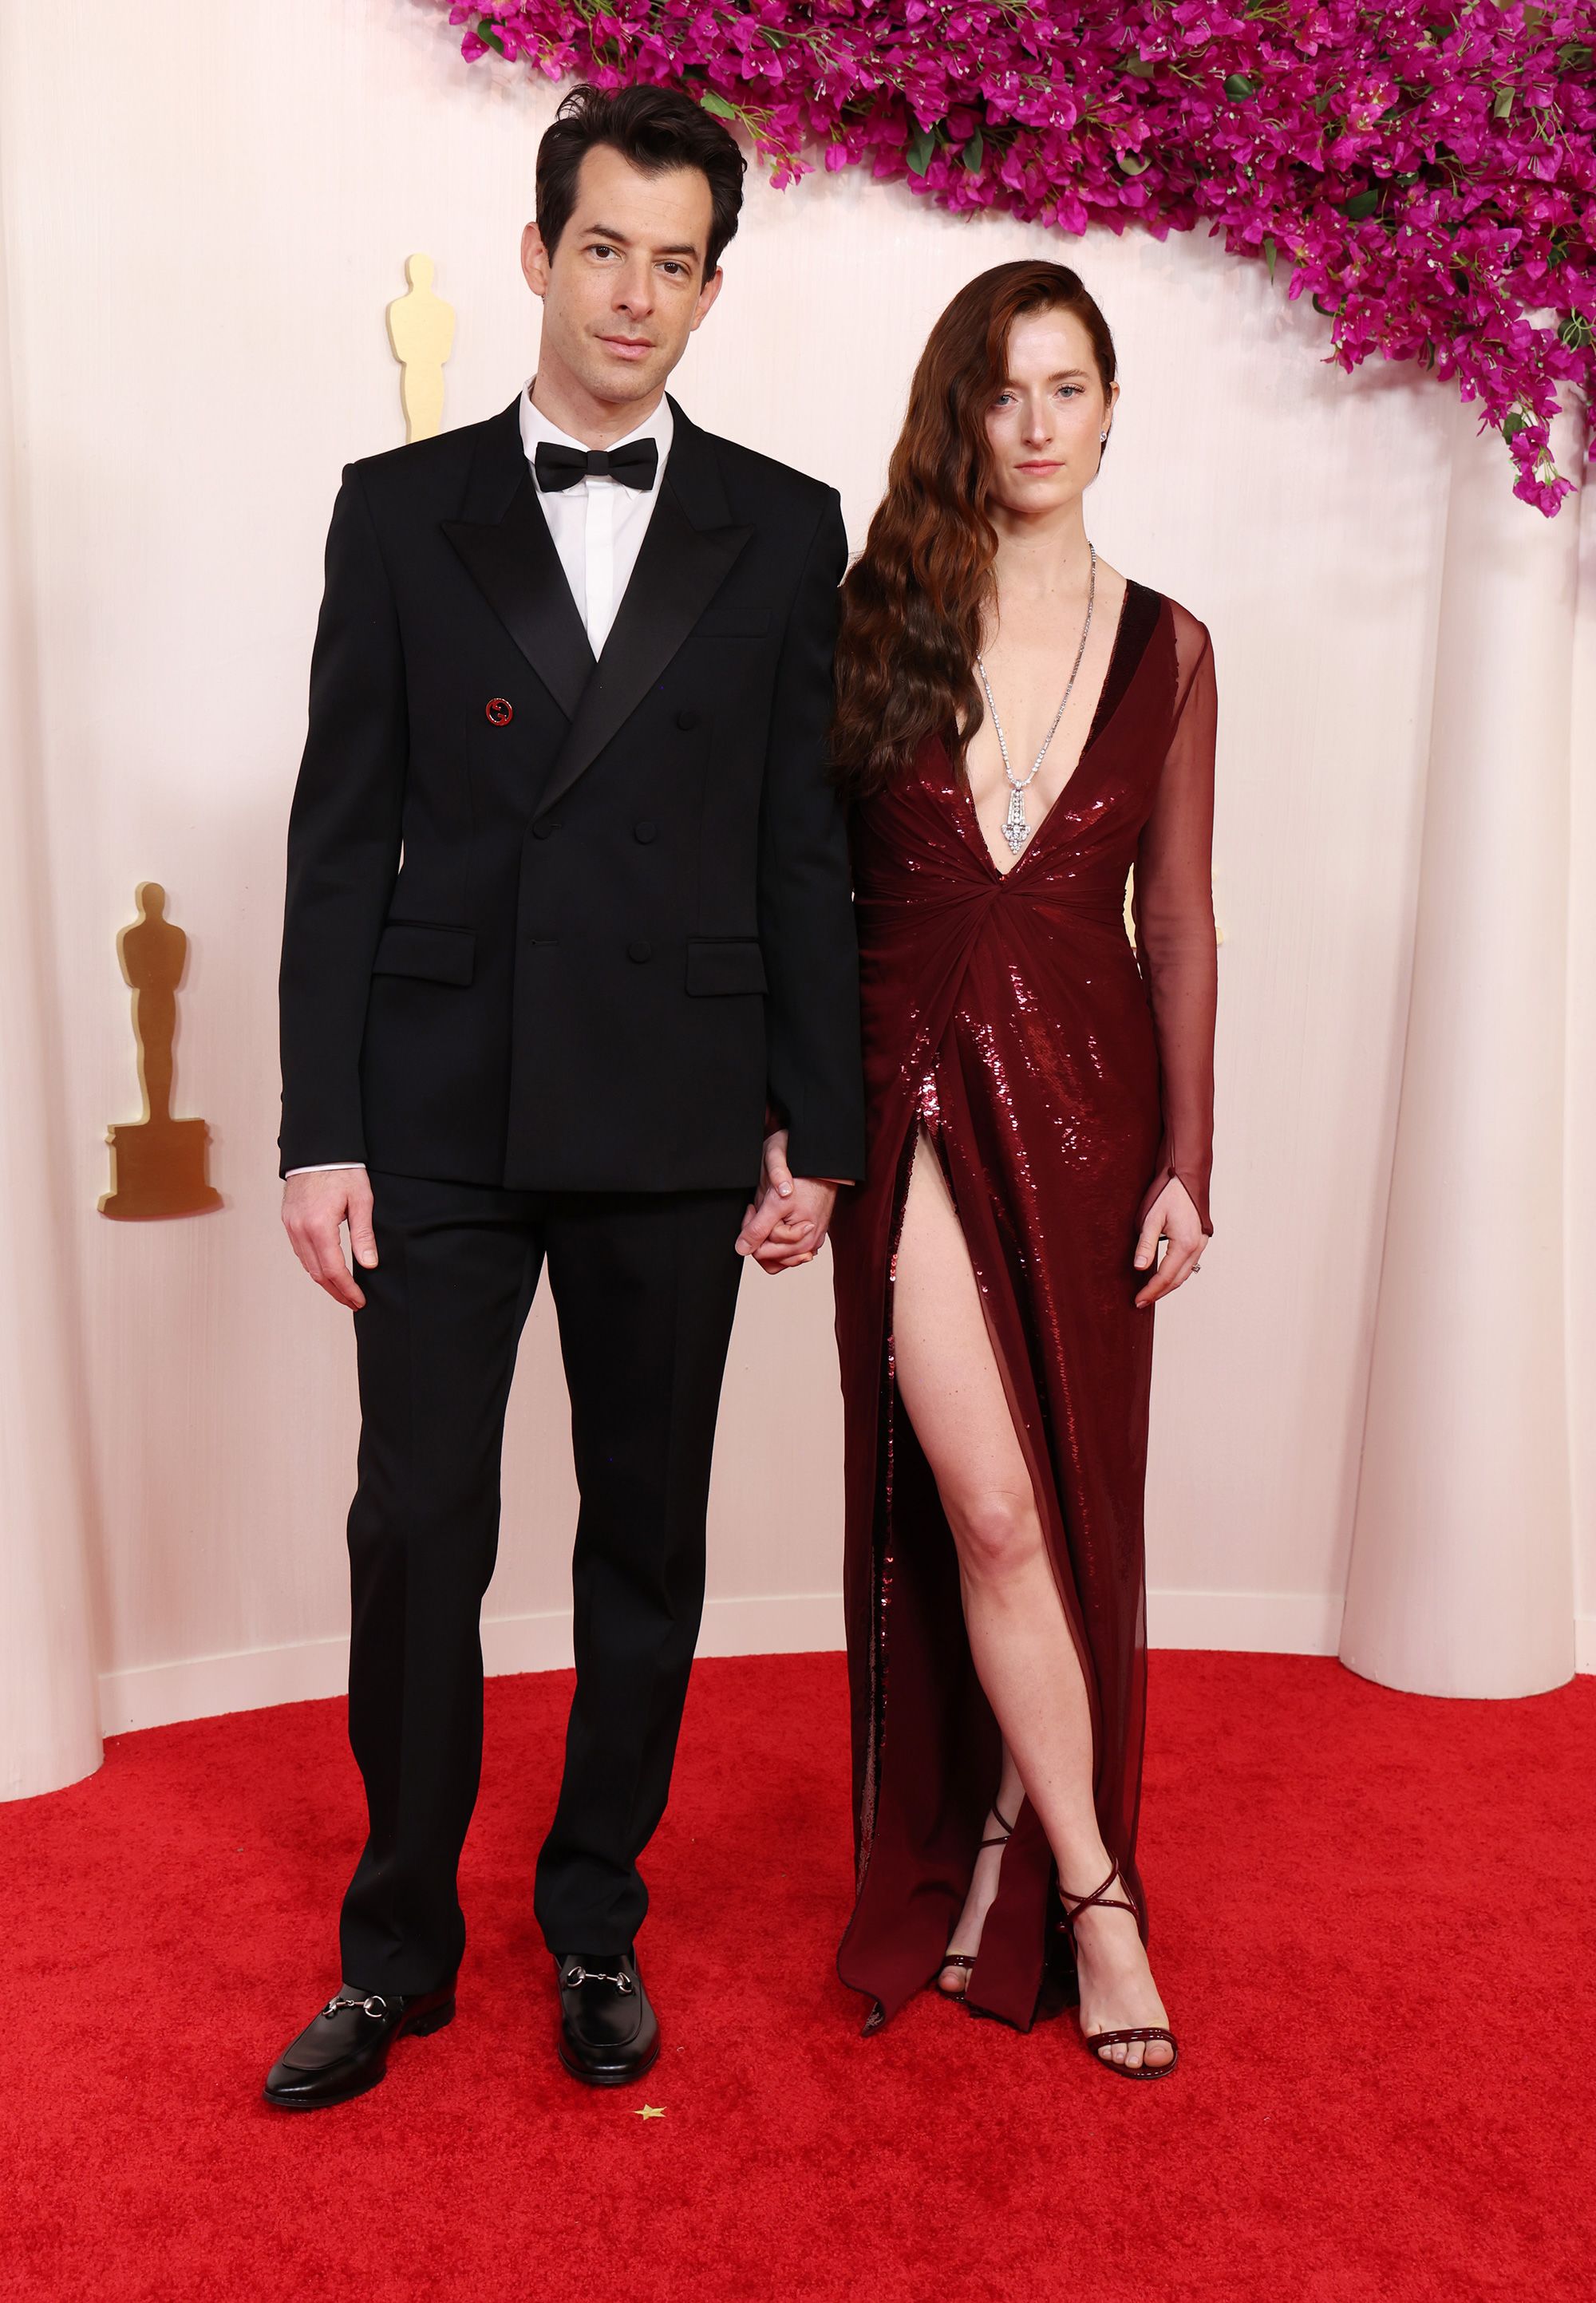 Best Original Song nominee (for “I’m Just Ken”) Mark Ronson wore a classic double-breasted Gucci suit. His wife Grace Gummer opted for a plunging Gucci red gown and Briony Raymond jewelry.